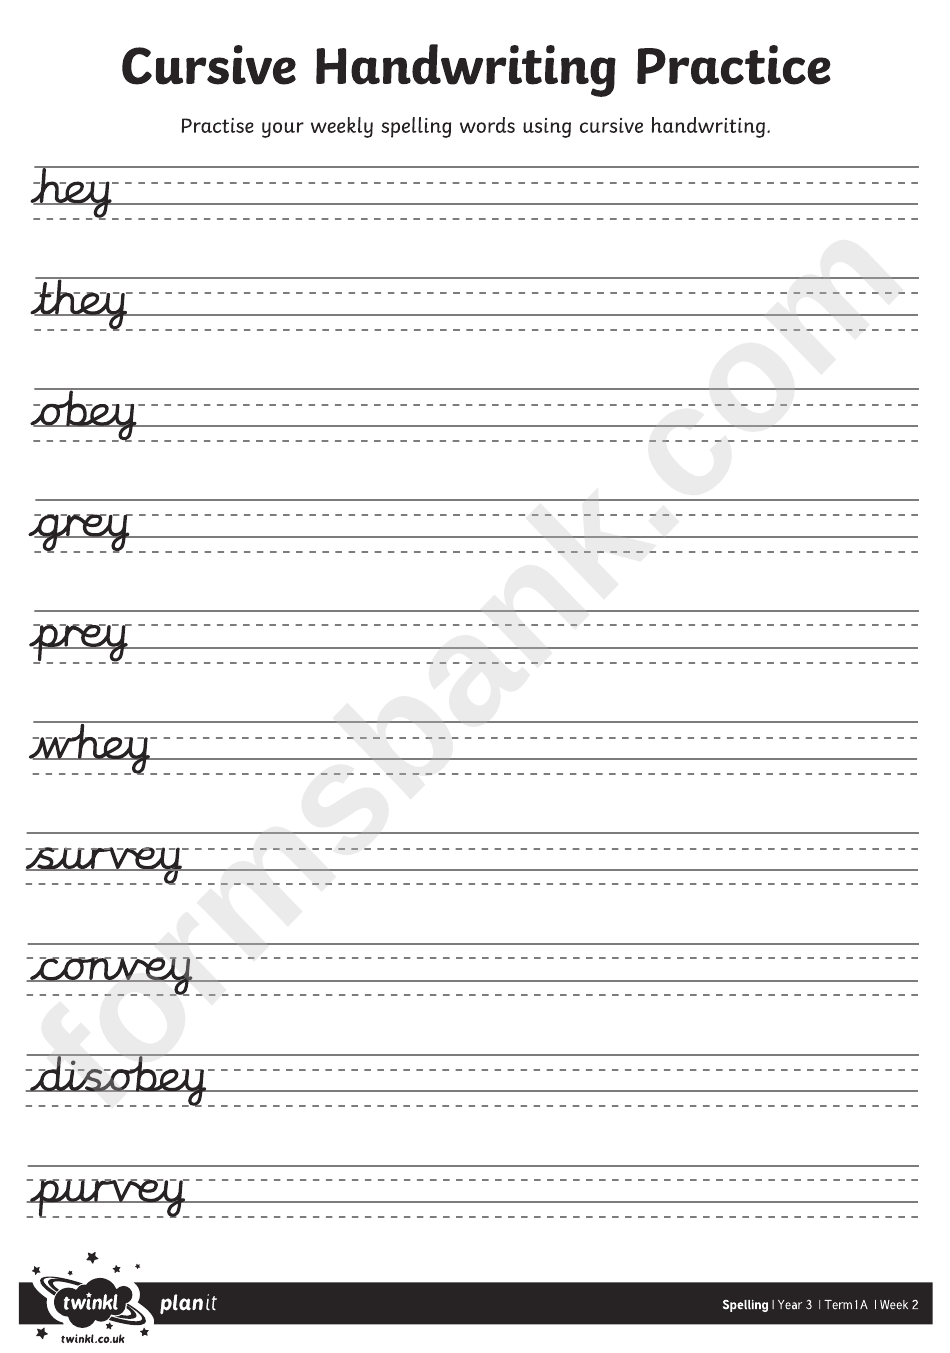 Hey/they/obey Cursive Practice Sheet - Year 3